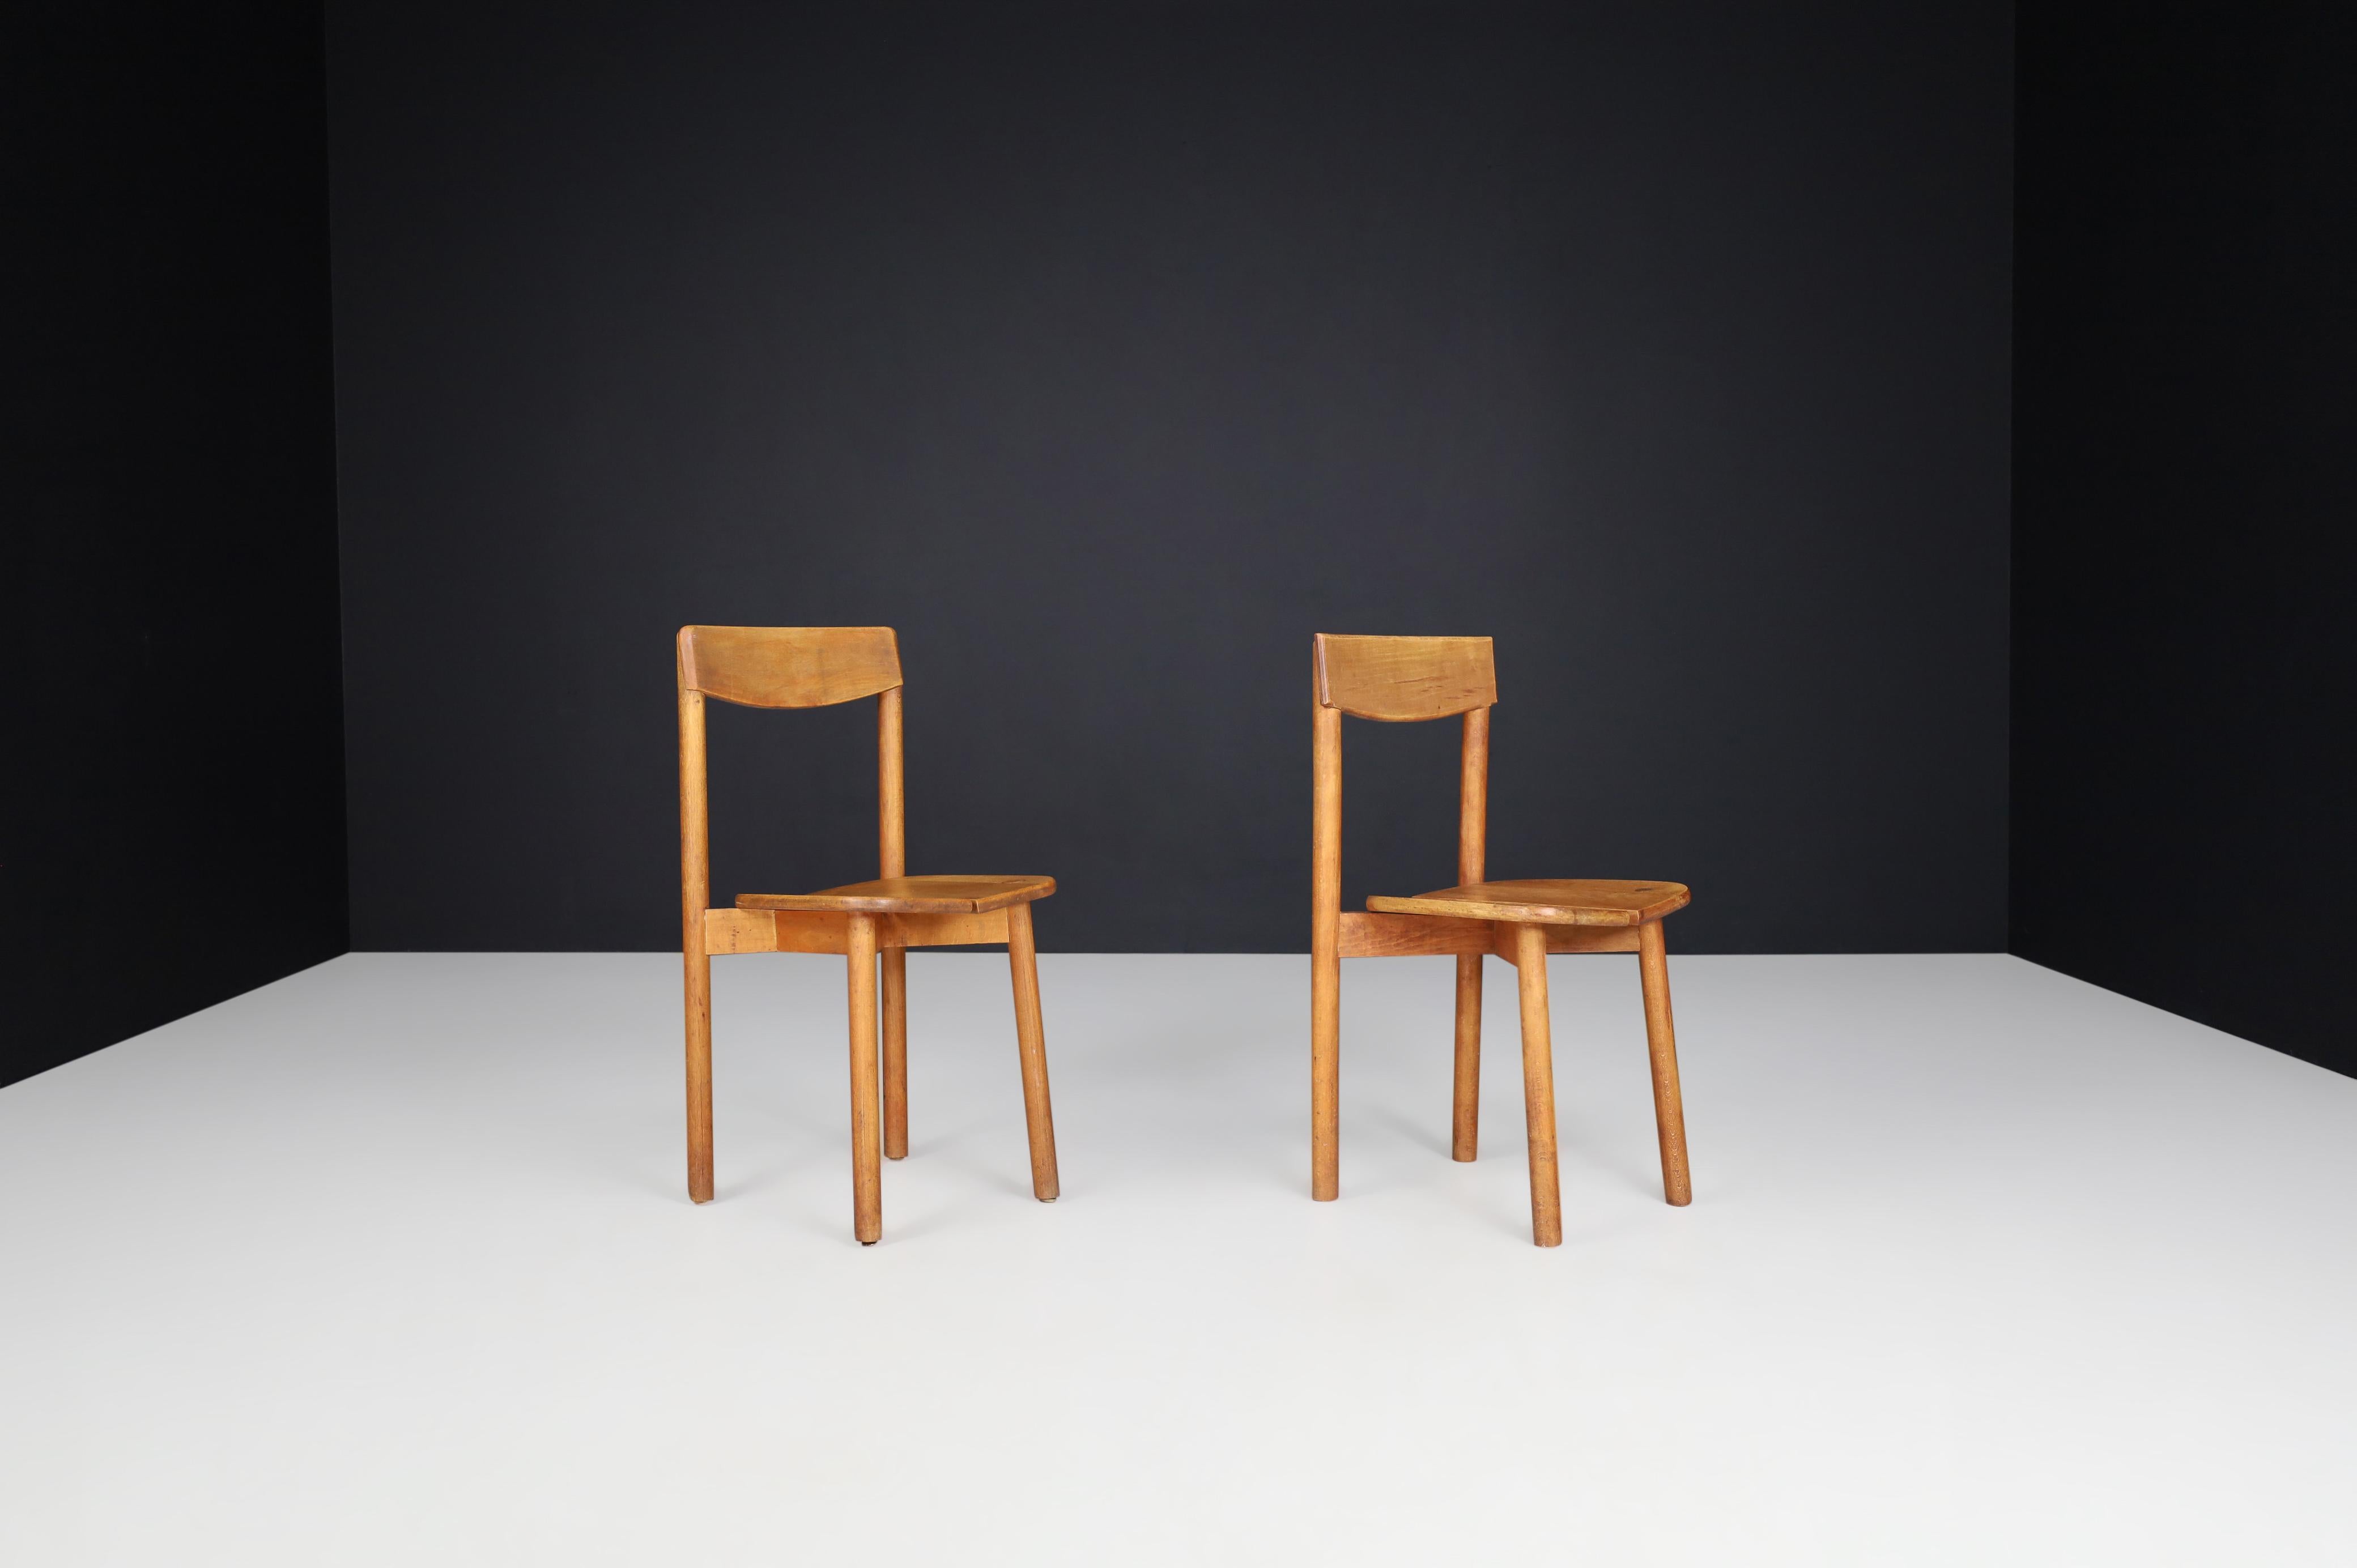 20th Century Pierre Gautier Solid Beech Chairs, France, 1960s For Sale